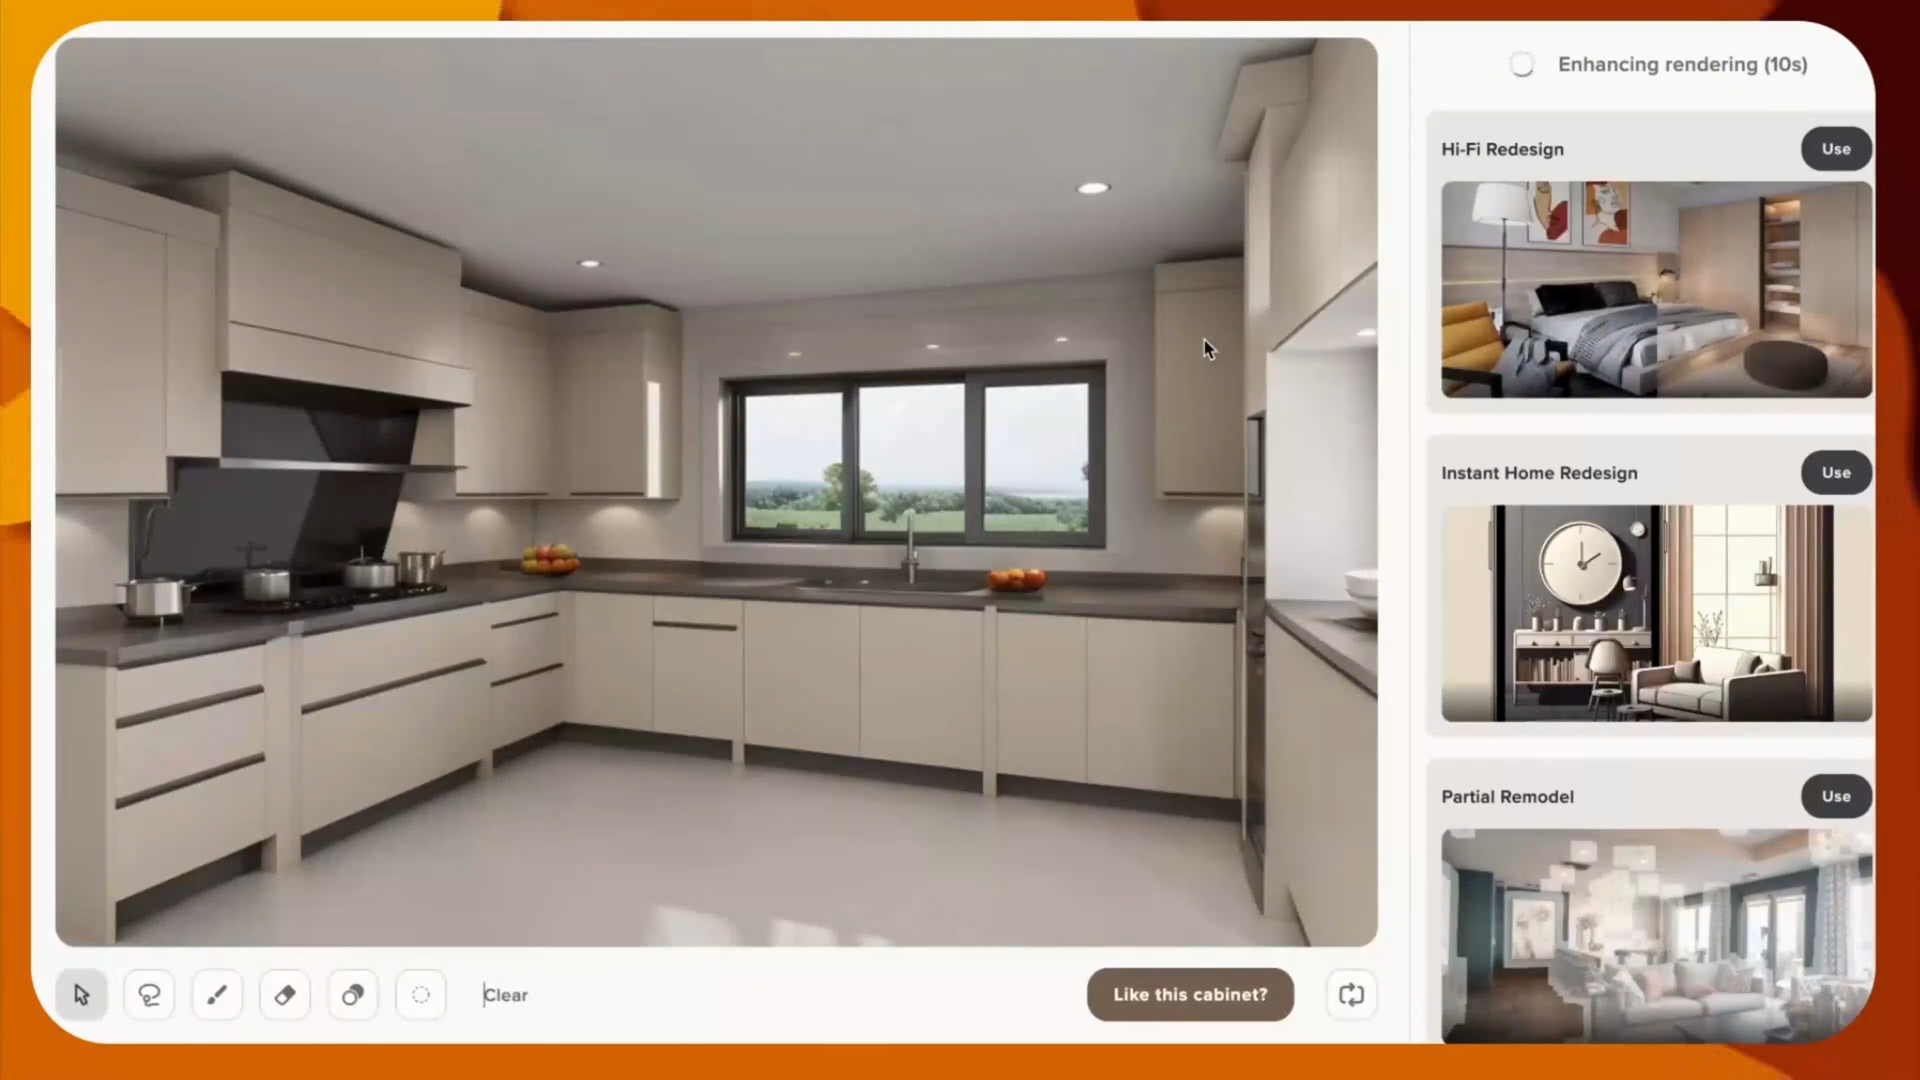 Experience the only platform for AI-driven, vendor-sourced cabinet rendering from Collov AI